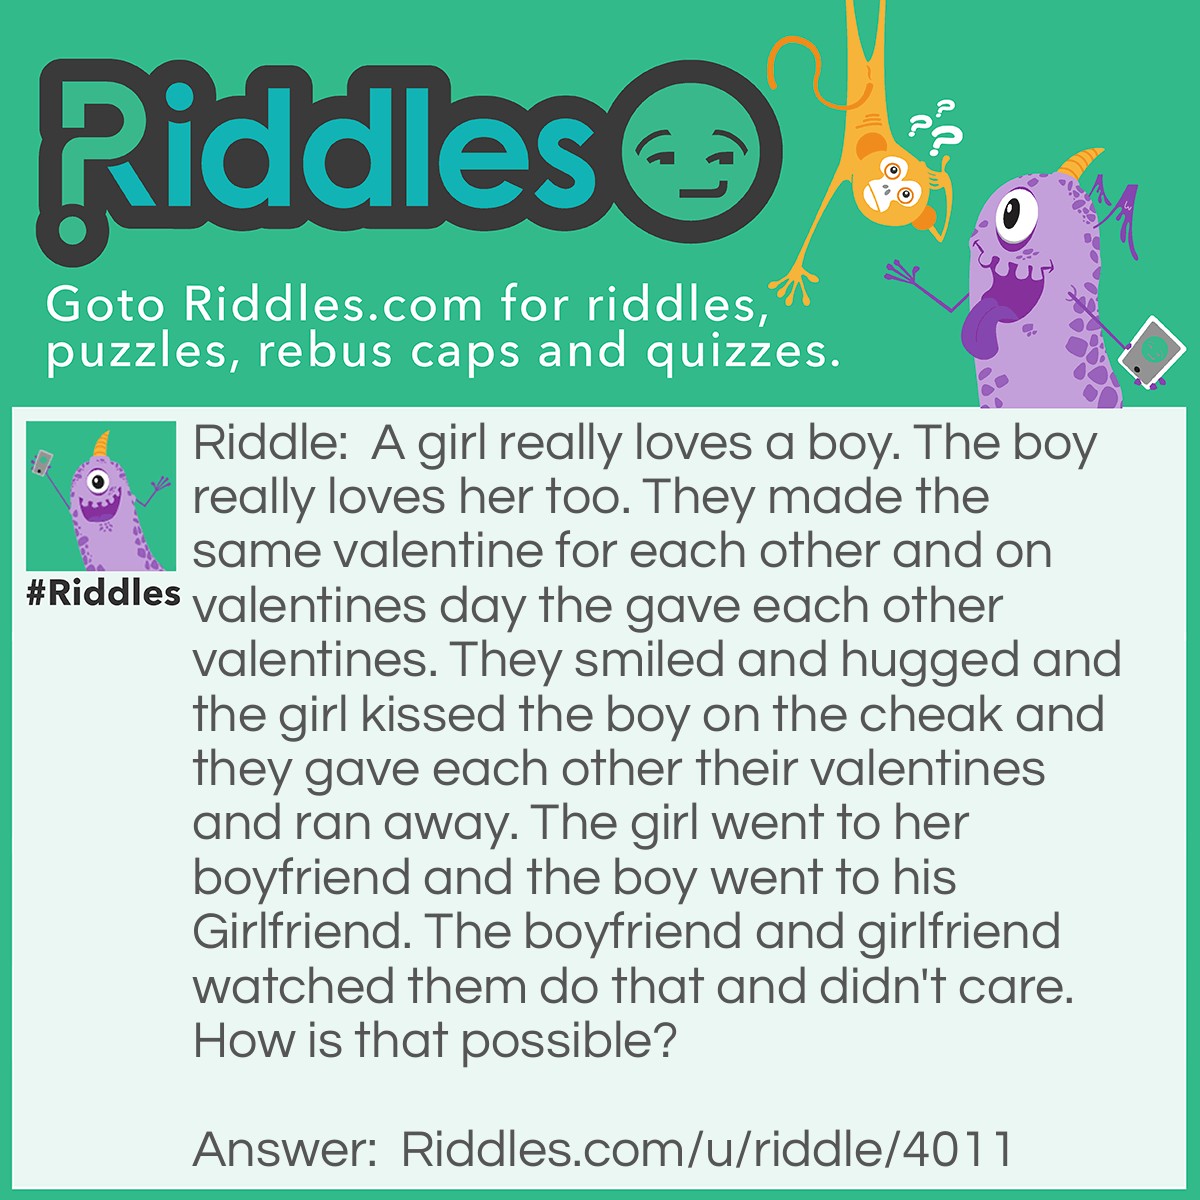 Riddle: A girl really loves a boy. The boy really loves her too. They made the same valentine for each other and on valentines day the gave each other valentines. They smiled and hugged and the girl kissed the boy on the cheak and they gave each other their valentines and ran away. The girl went to her boyfriend and the boy went to his Girlfriend. The boyfriend and girlfriend watched them do that and didn't care. How is that possible? Answer: They are Siblings.